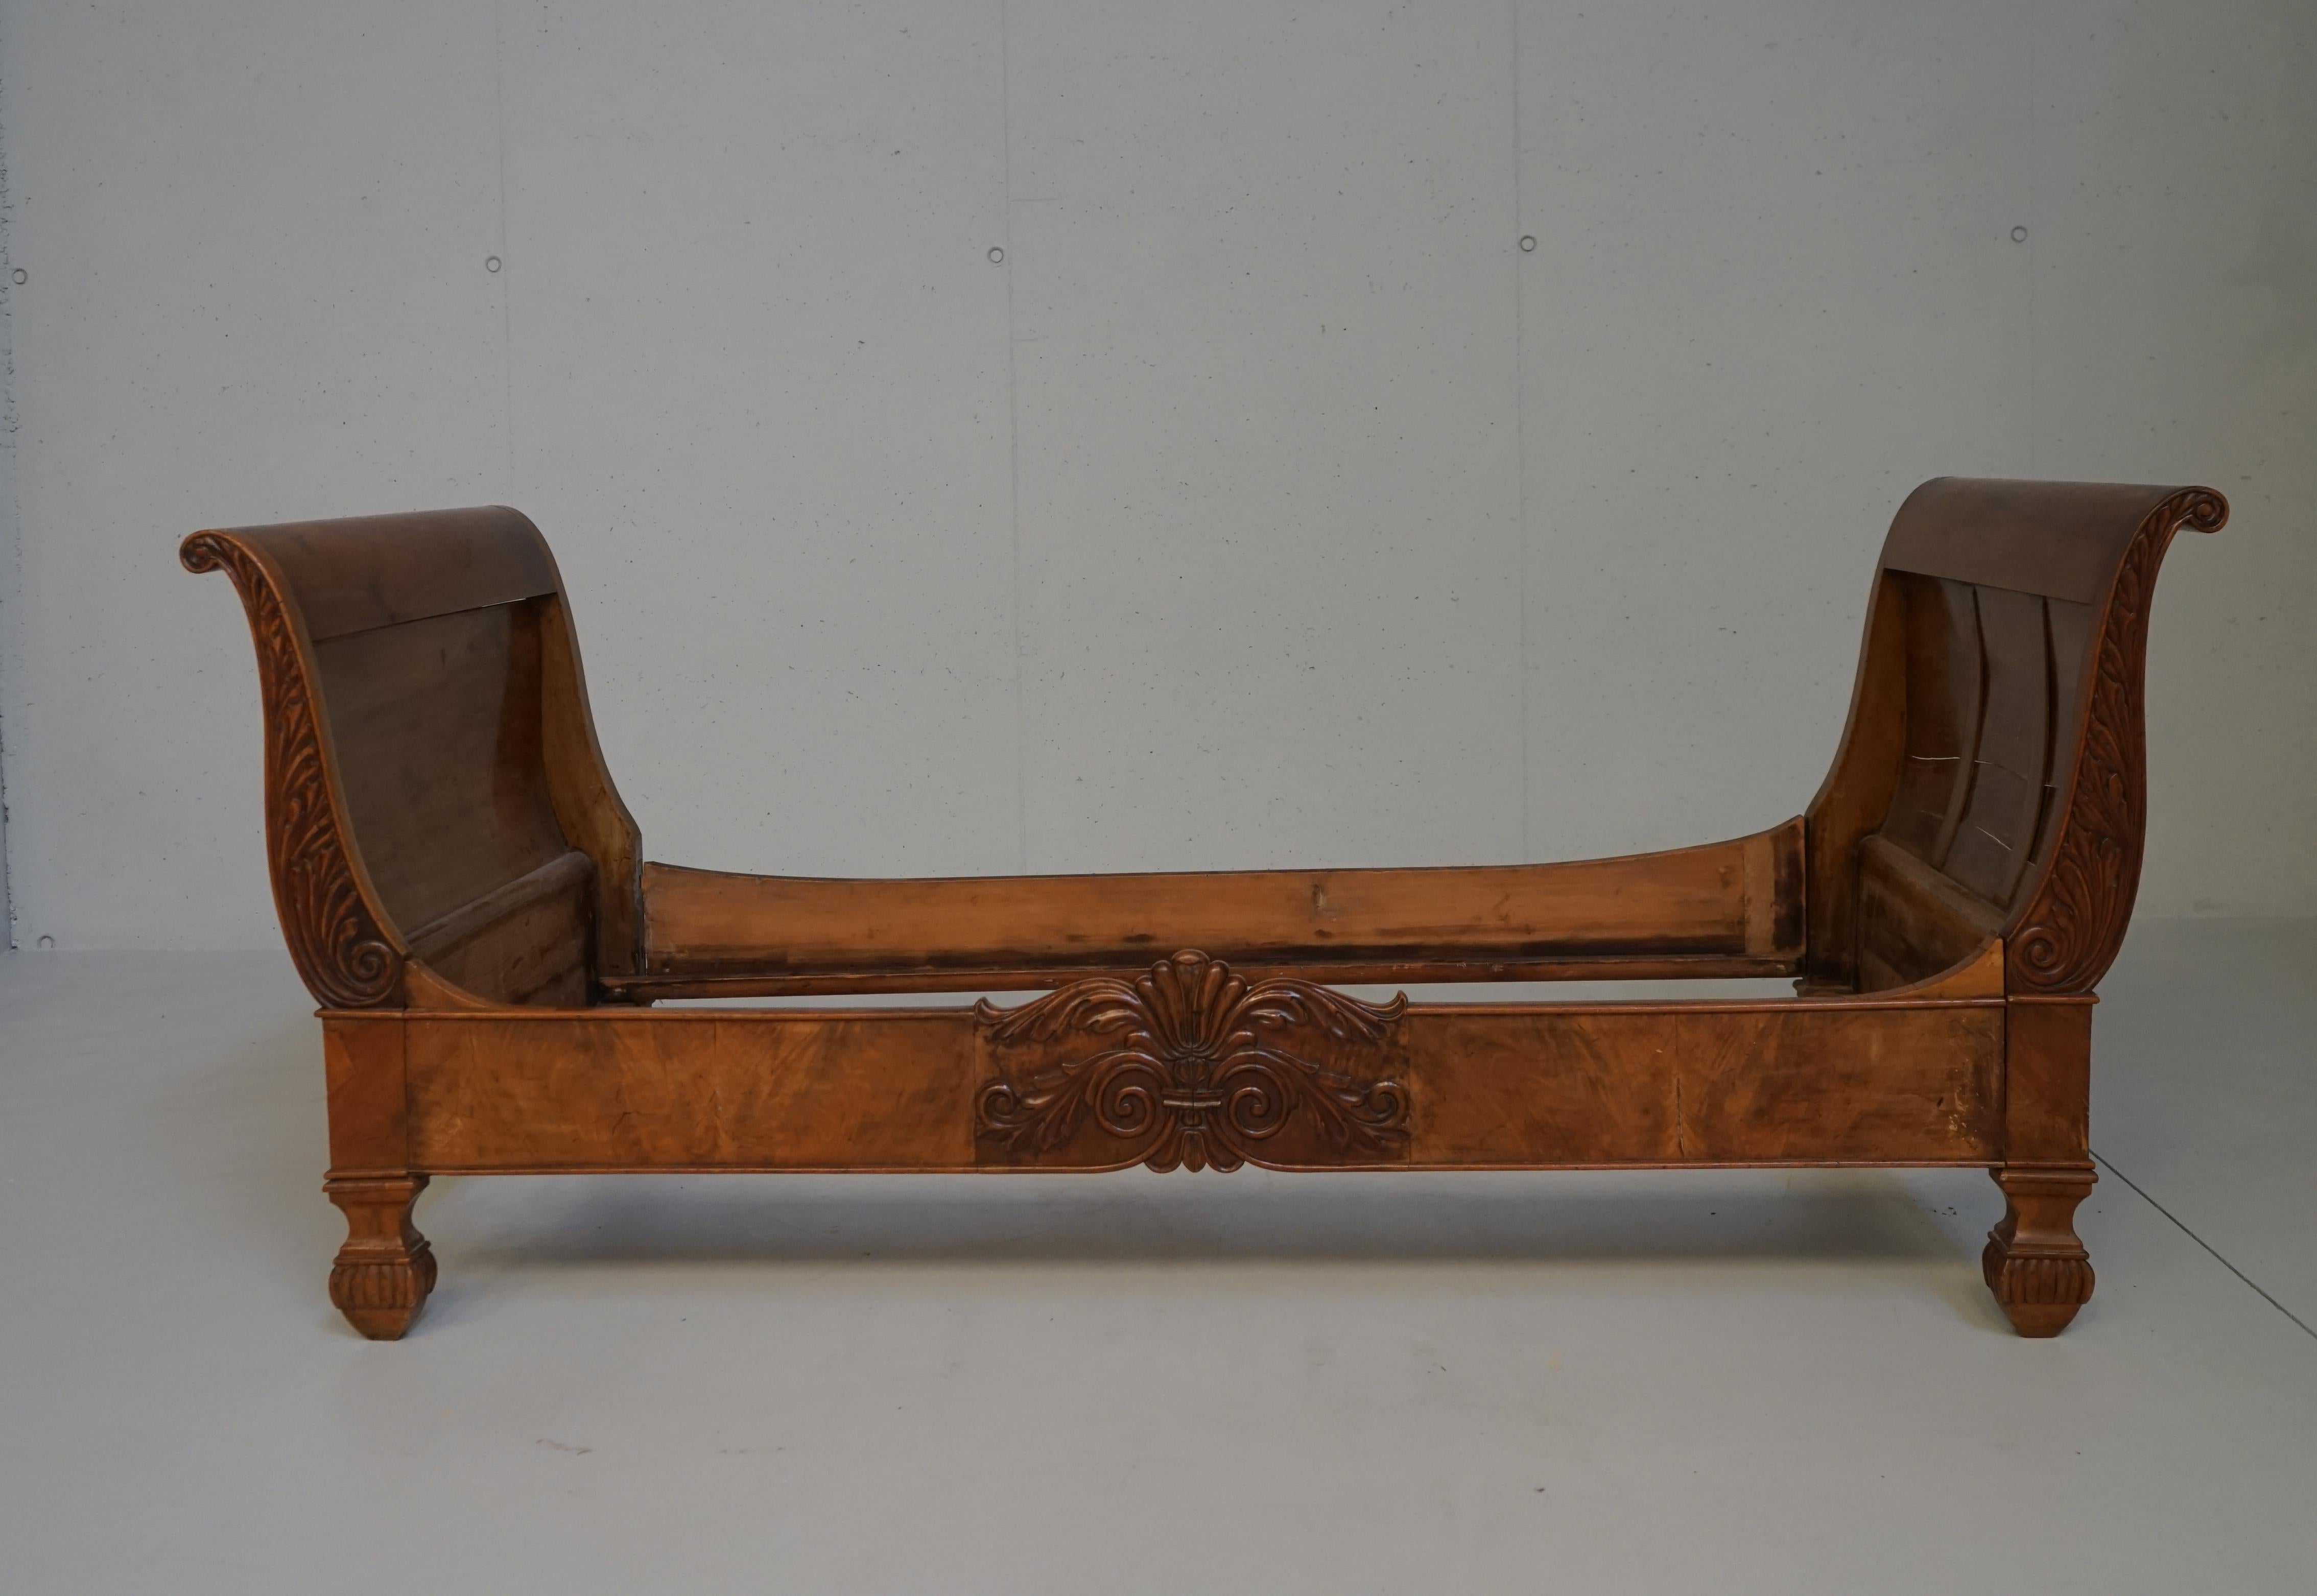 Boat bed frame in original condition form the first half of the 1800. The bed frame is in solid walnut wood with precious carved decorations on the front and around headboard and footboard.
The frame is supplied without mattress or pillows. It can